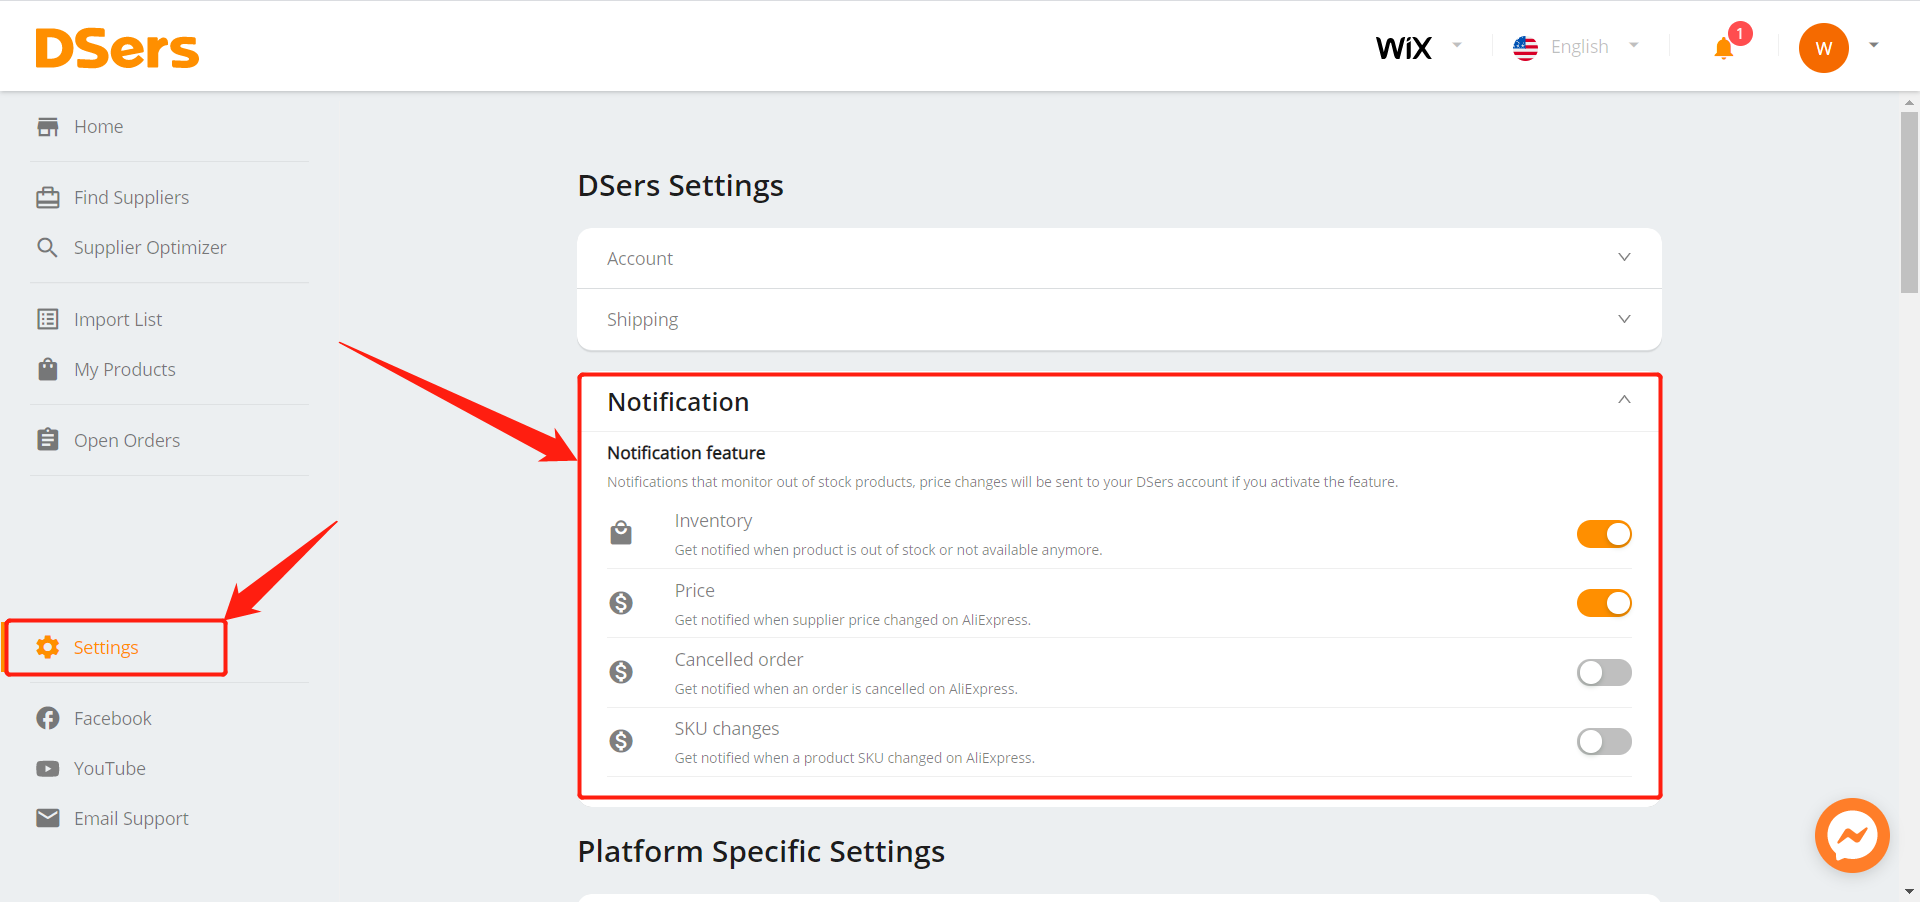 Activate Notification - DSers - Setting - Notification - Wix DSers